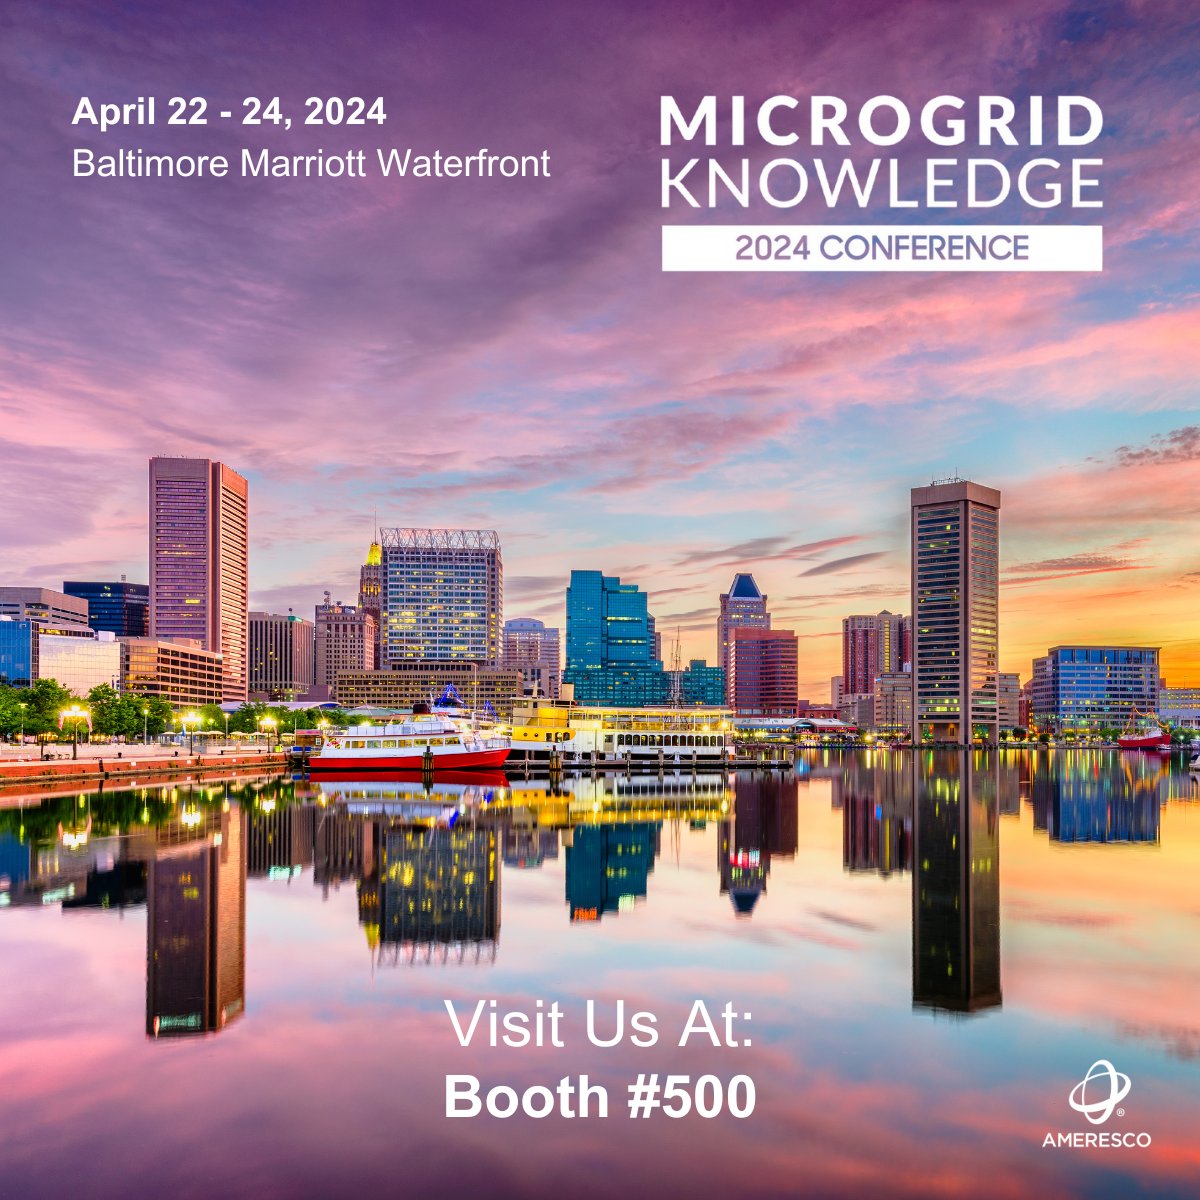 We'll be at @MGKNews's 2024 conference in Baltimore, MD next week. Come see us at Booth #500 to learn about how we enable municipalities and businesses to secure their own energy supply and infrastructure while advancing #resiliency and #netzero goals. hubs.ly/Q02sTxCz0